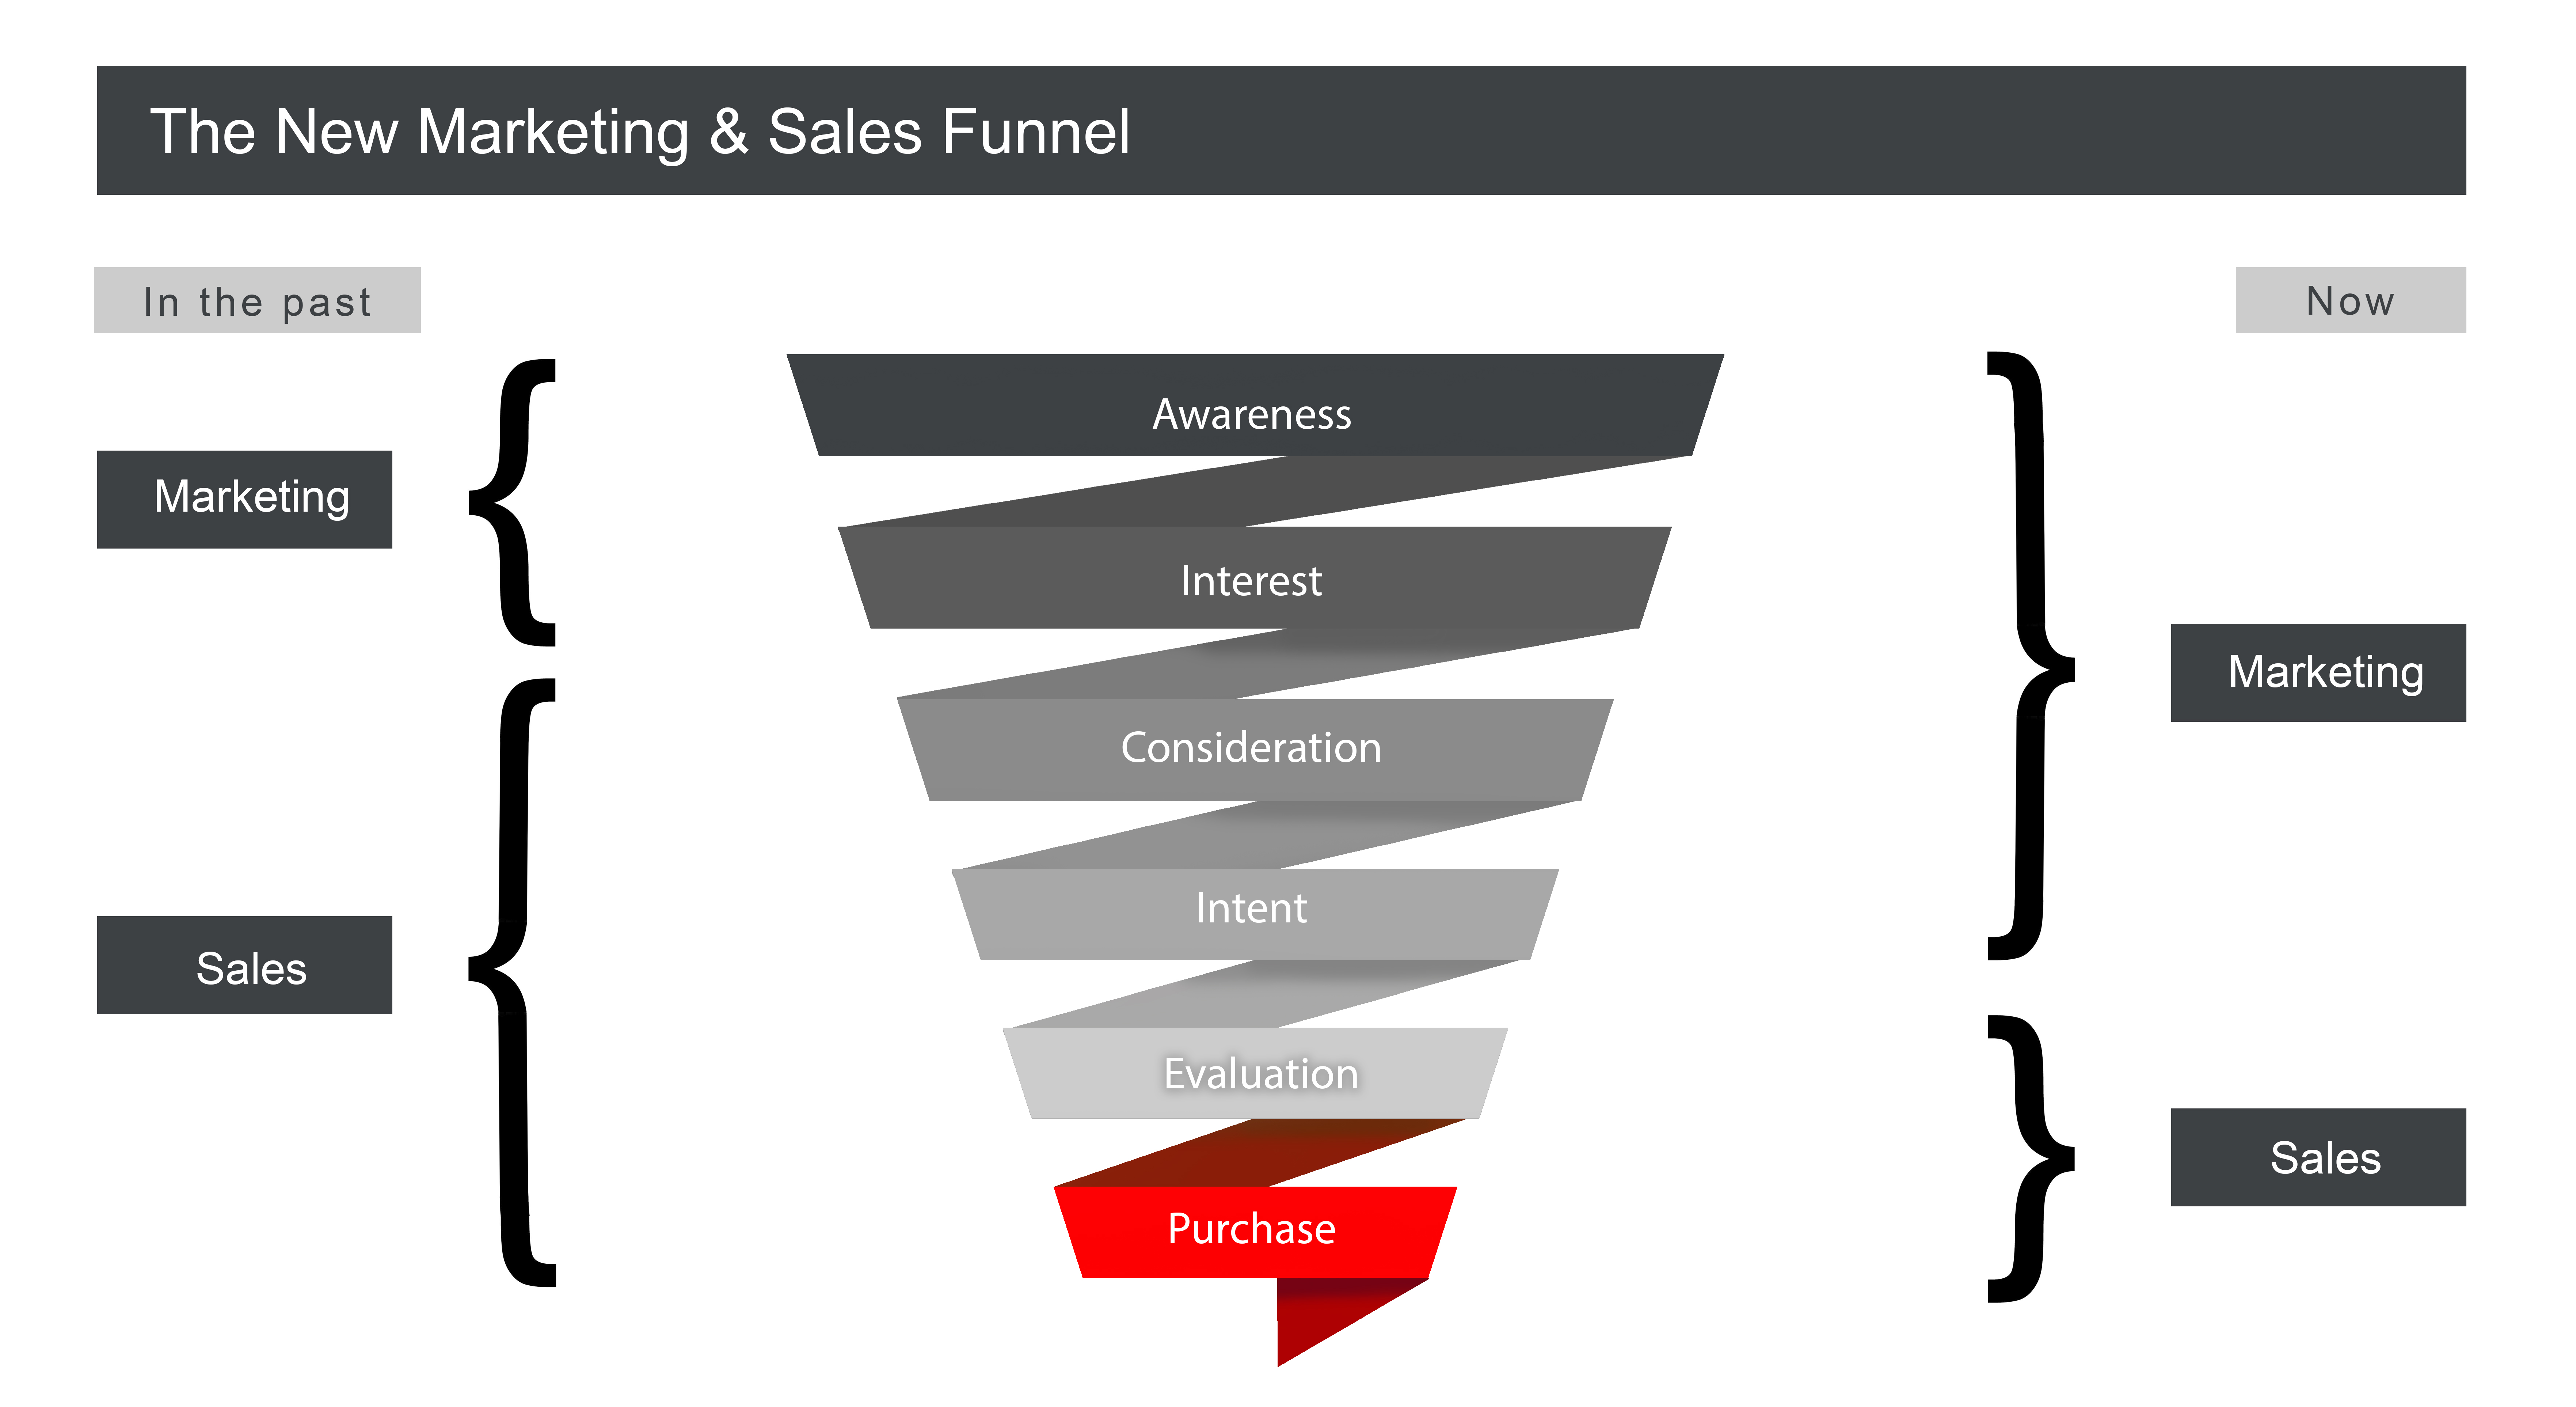 Shift from sales to marketing